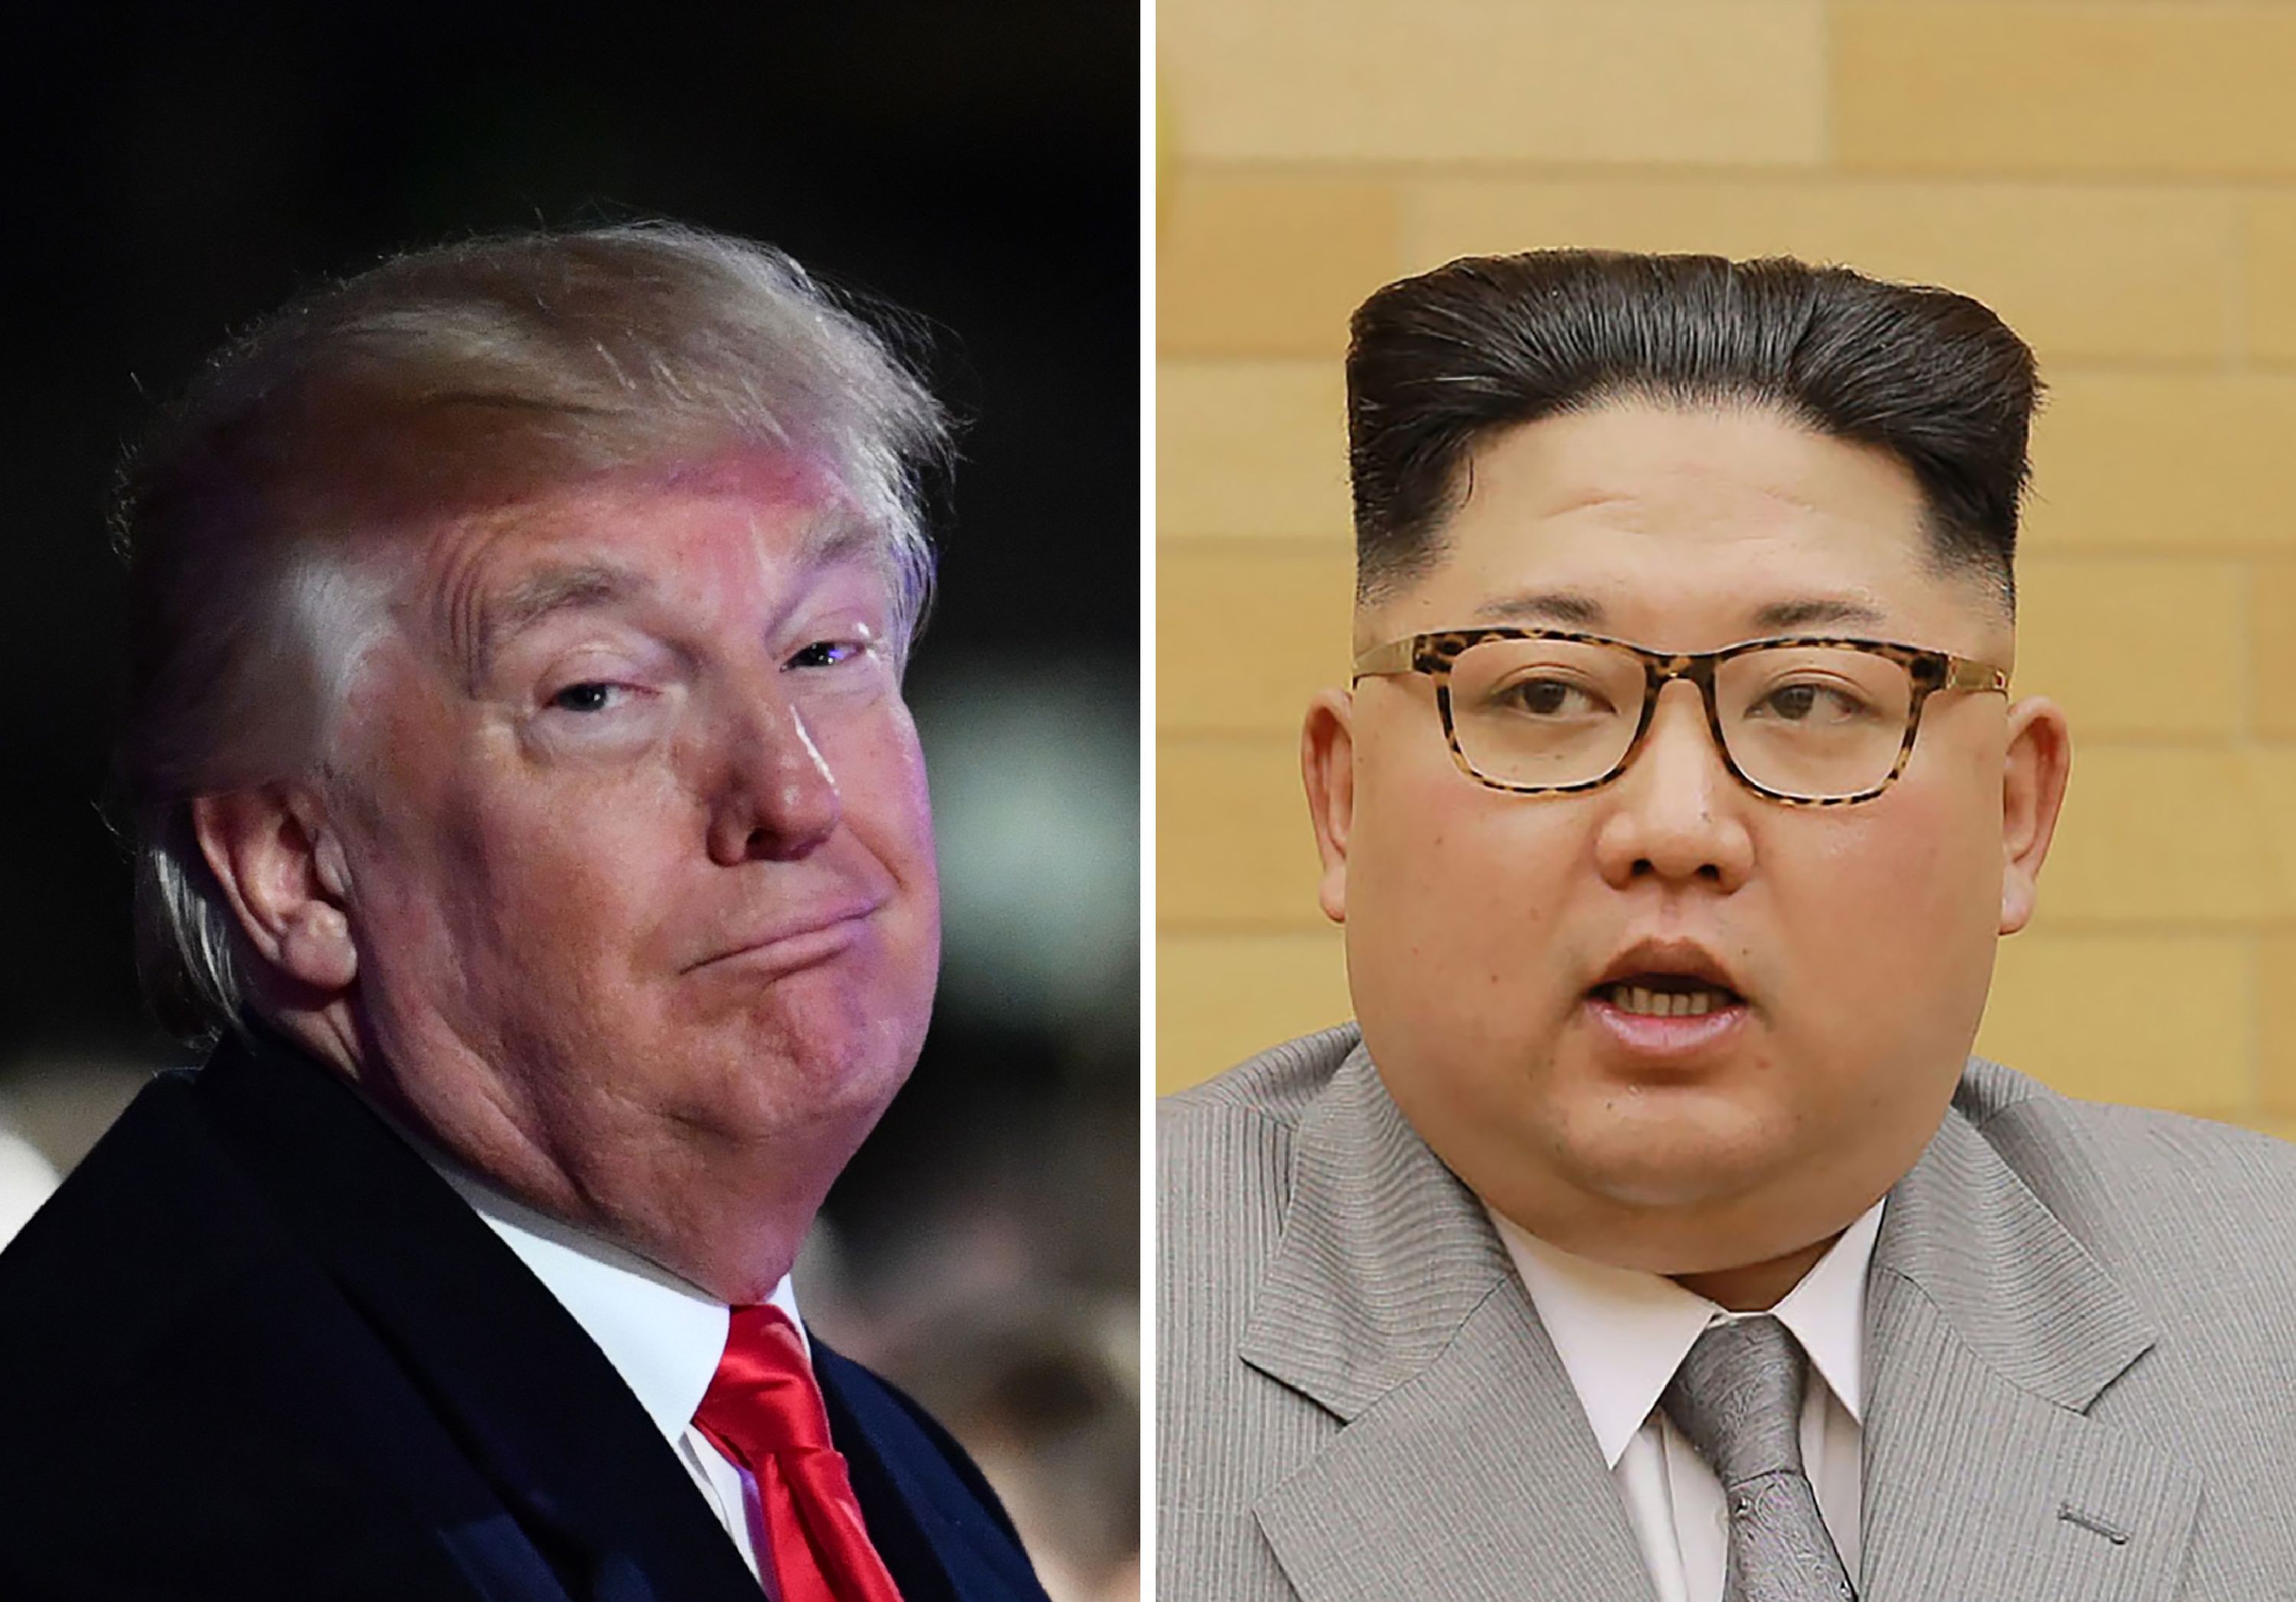 Donald Trump and Kim Jong-un are known for their mercurial natures – which may help the nuclear crisis. Photo: AFP